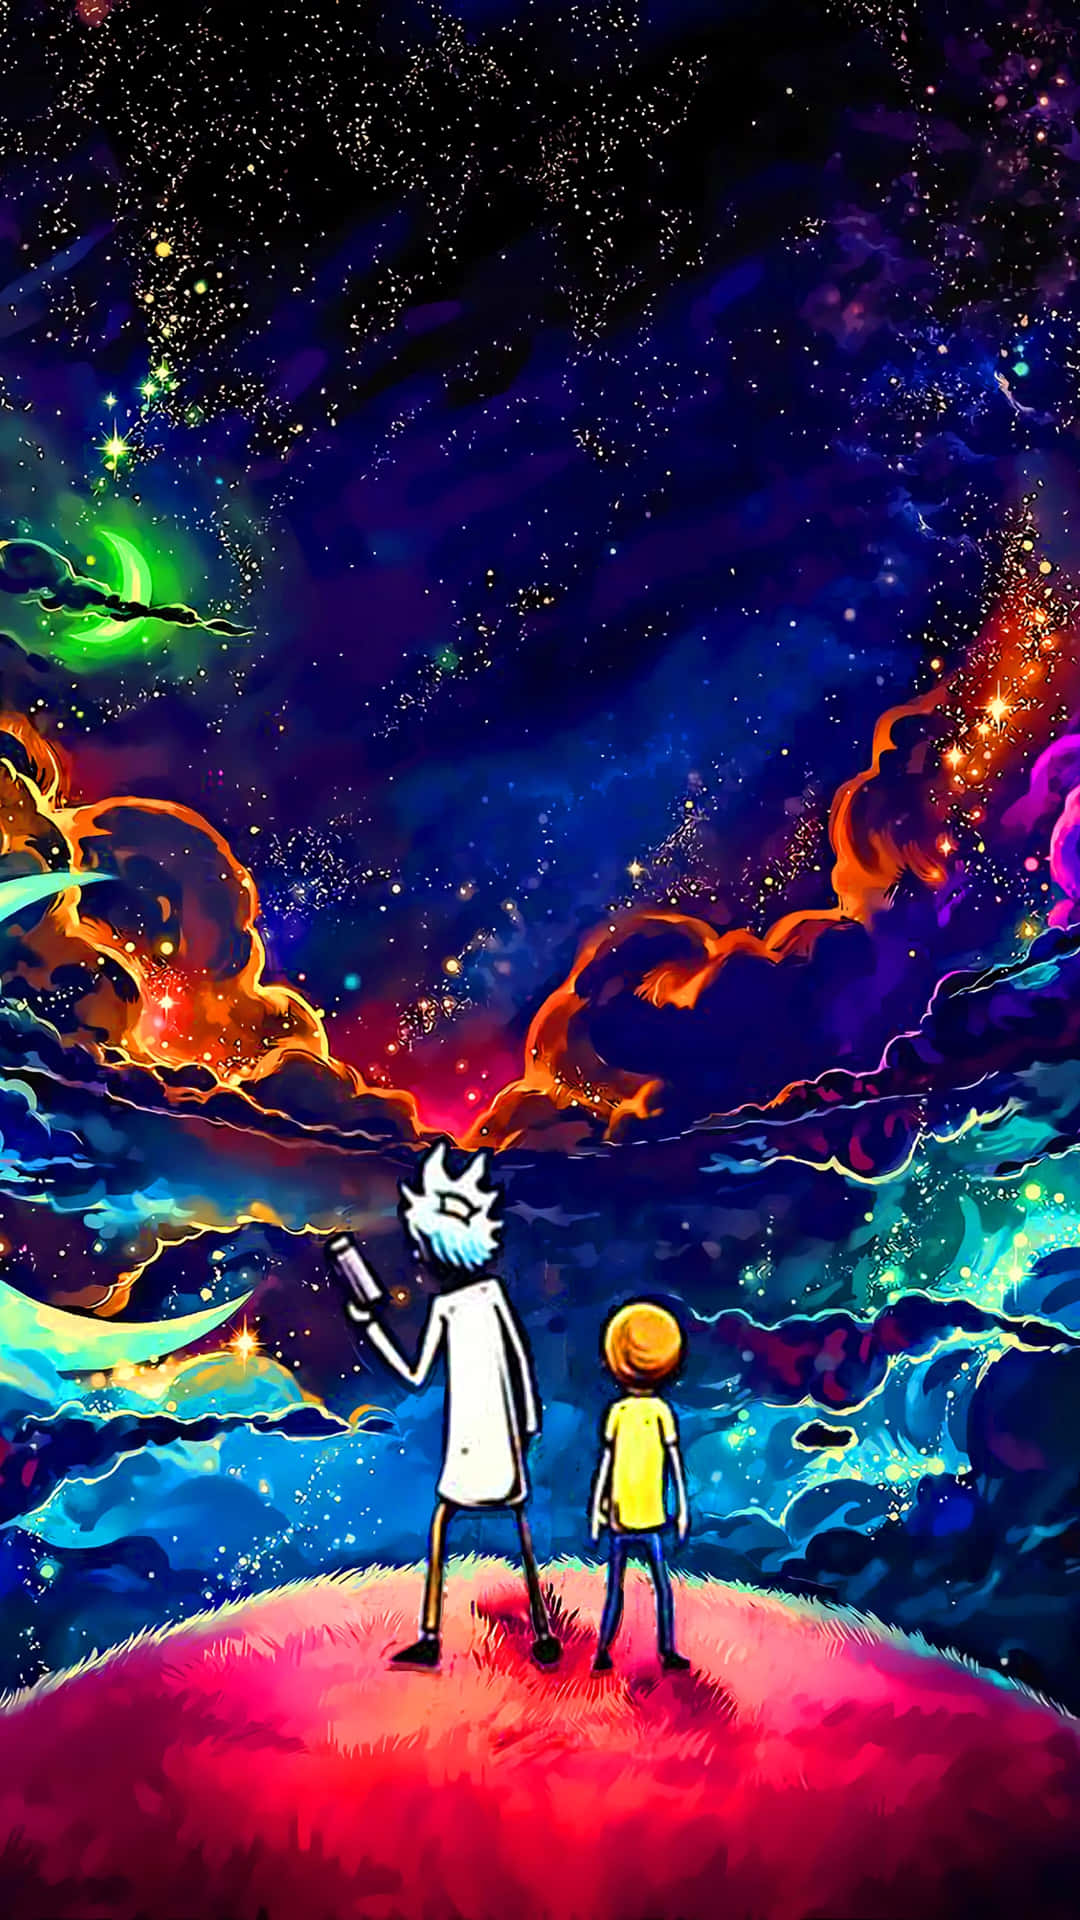 Dynamic Duo Travelling Through Space